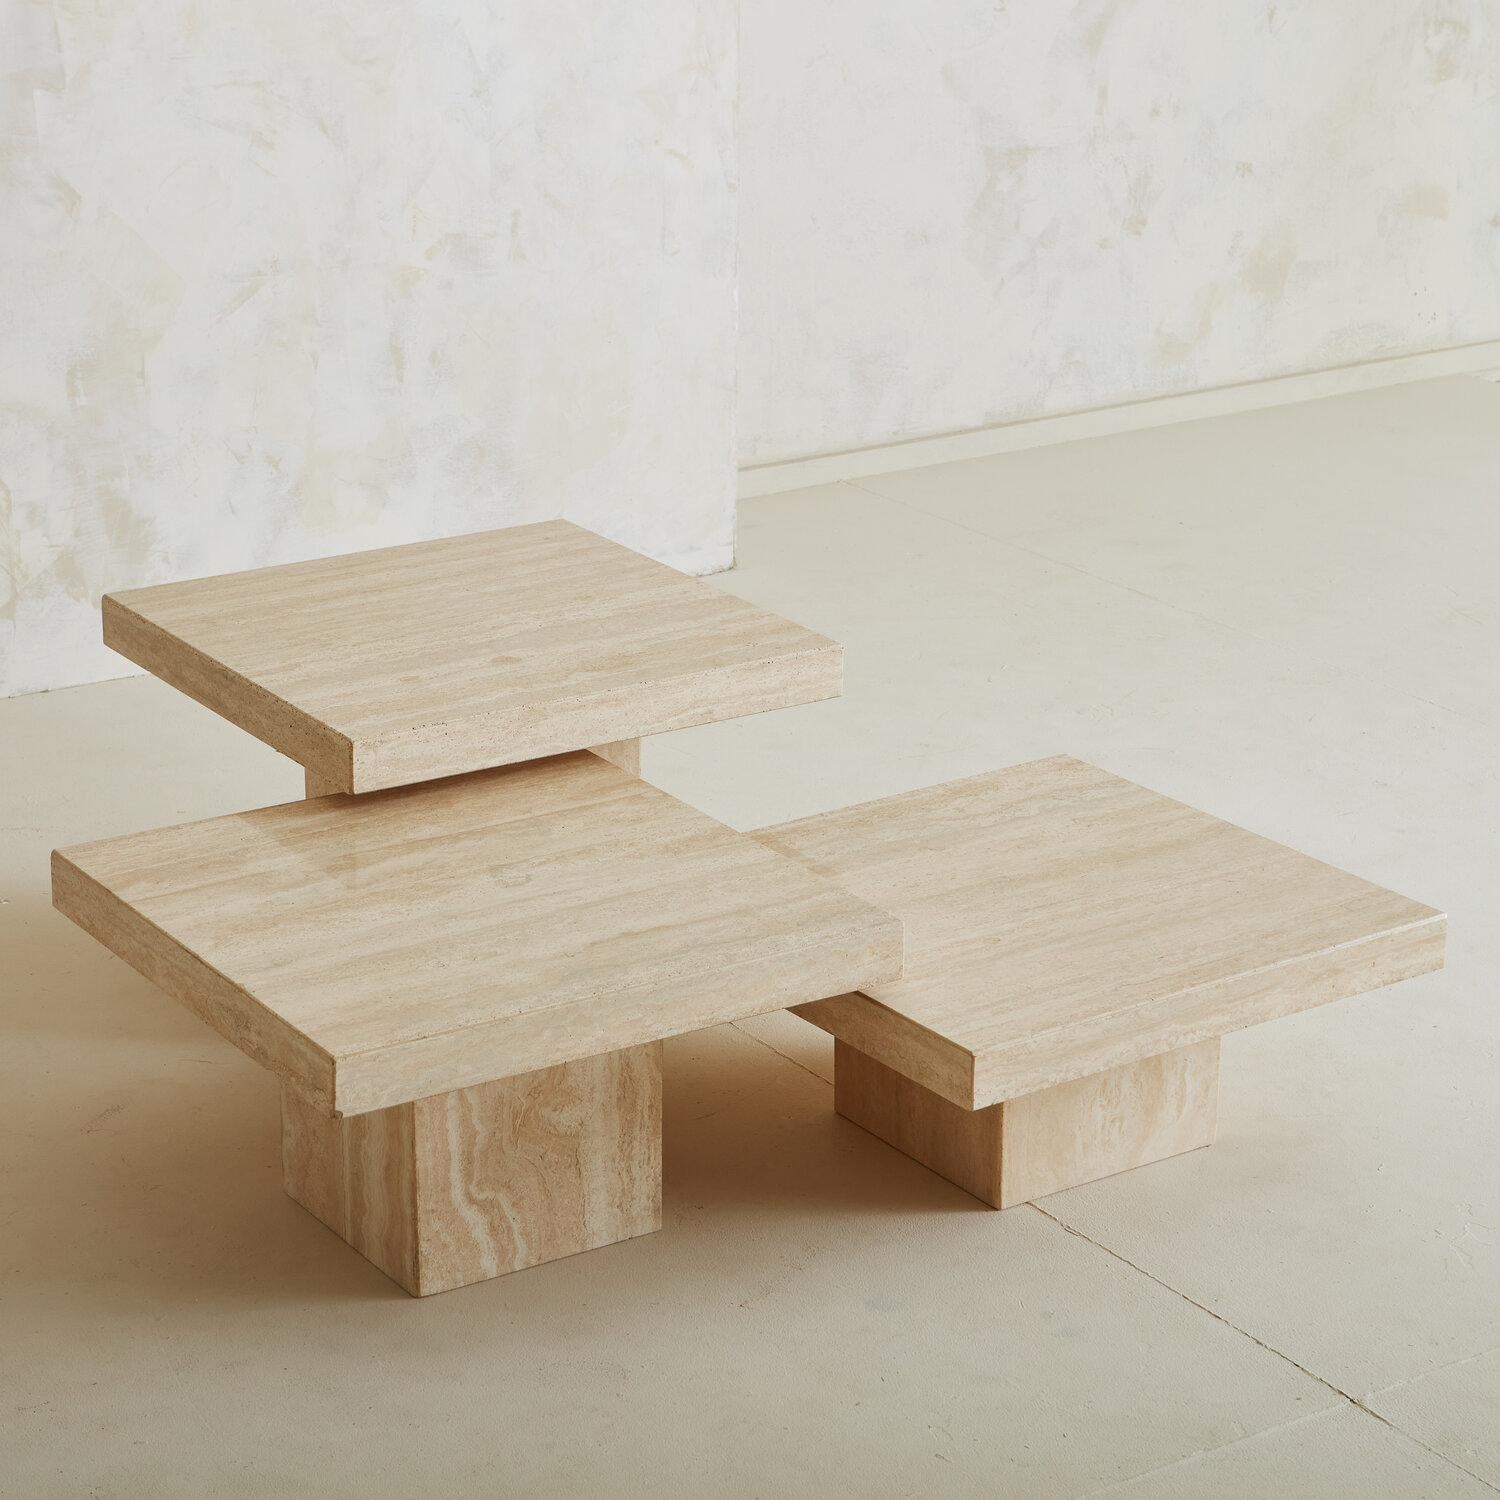 A trio of honed travertine coffee tables with square table tops and bases. Group them together as a coffee table, or spread them out as side tables. The varying heights allow them to be arranged in any configuration desired. These tables feature